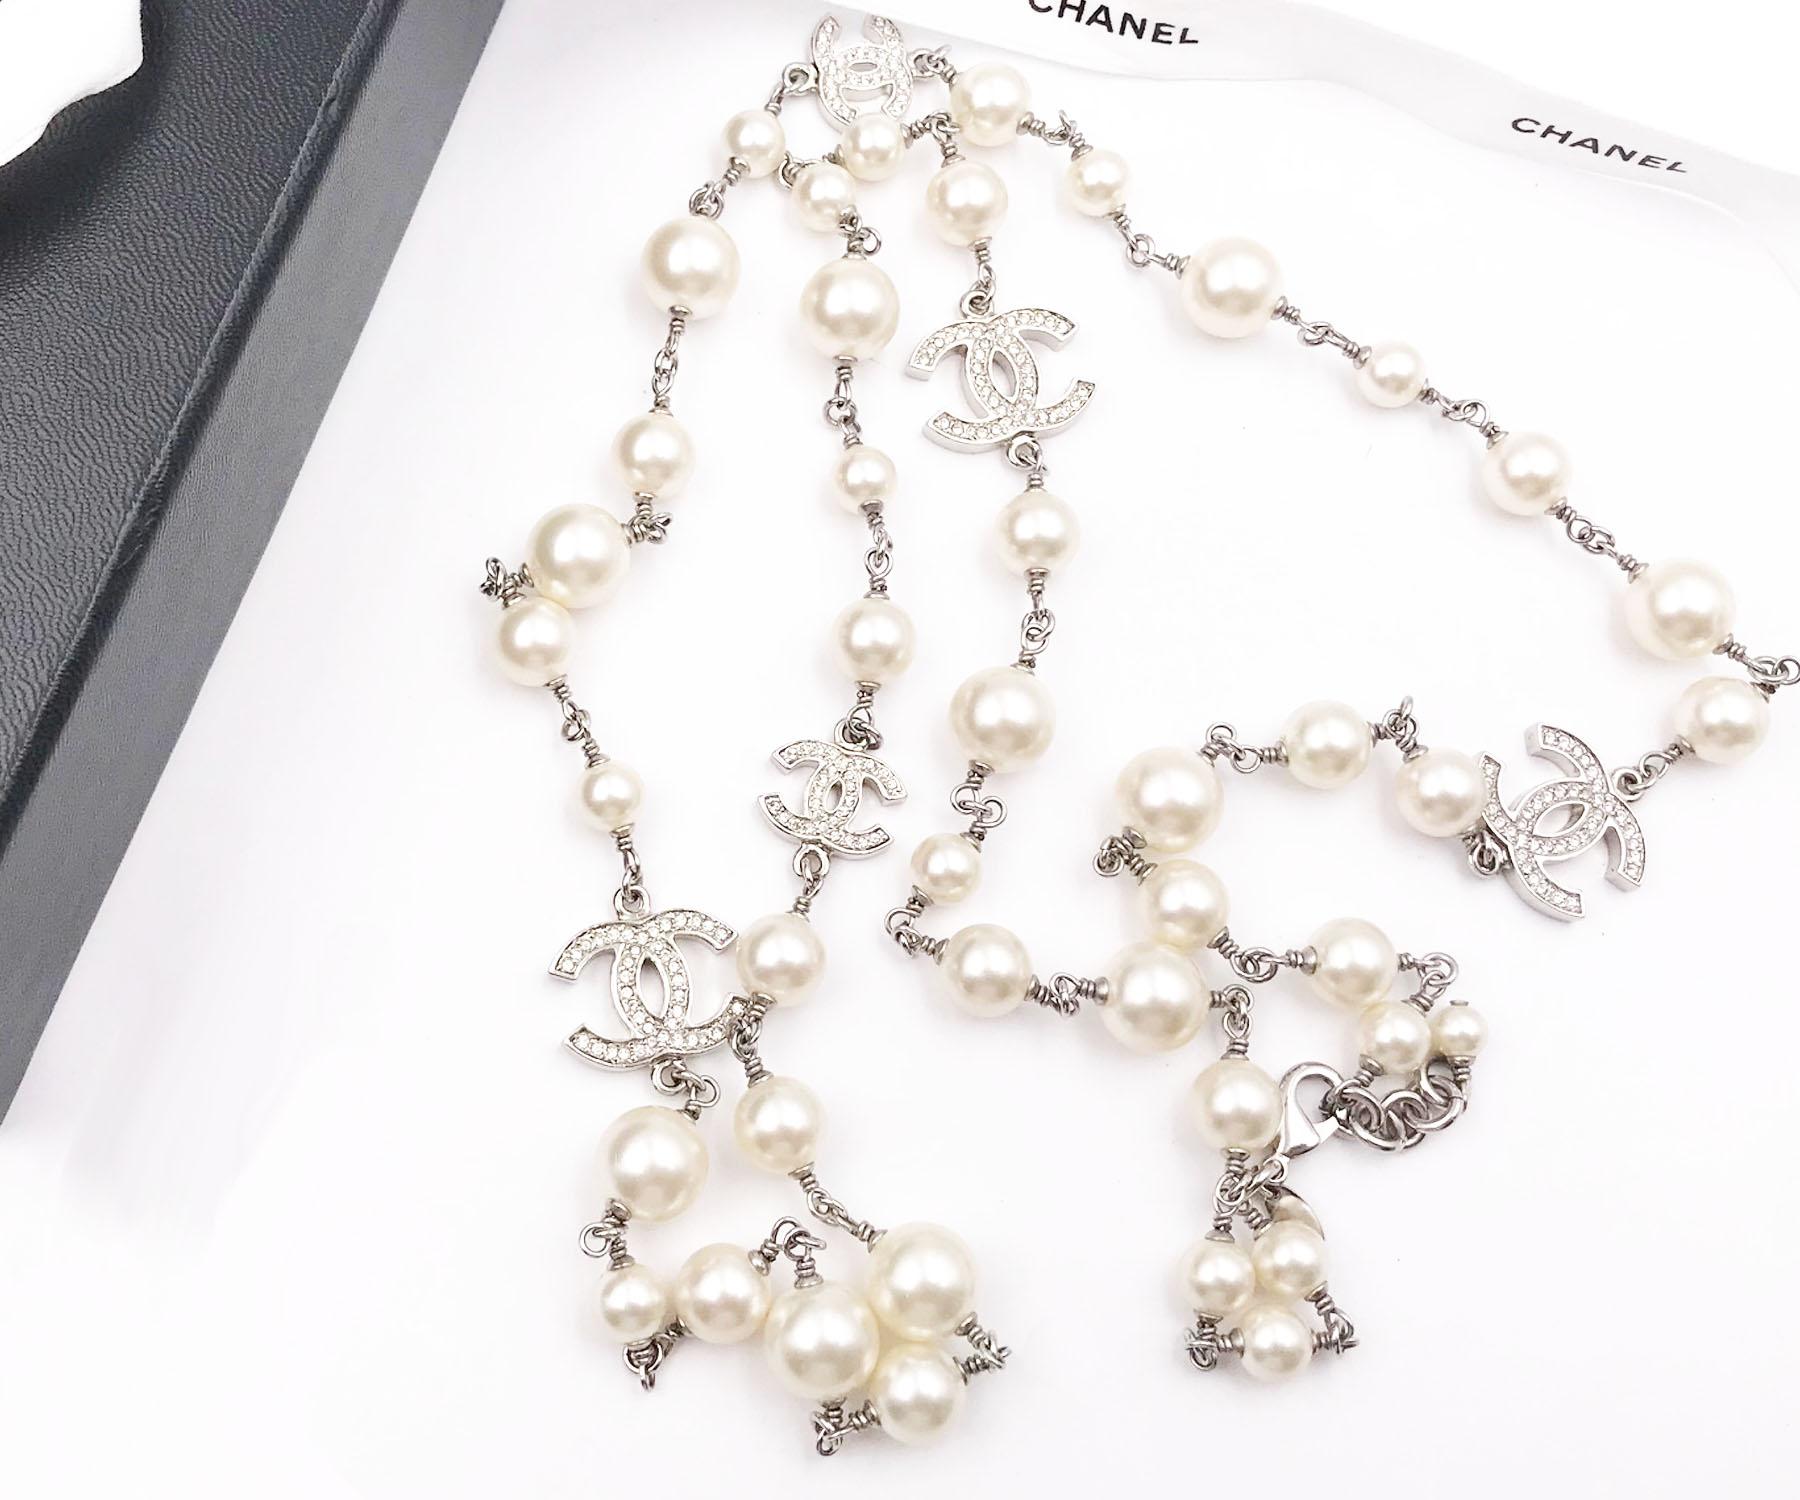 Artisan Chanel 5 Silver CC Crystal Faux Pearl Long Necklace